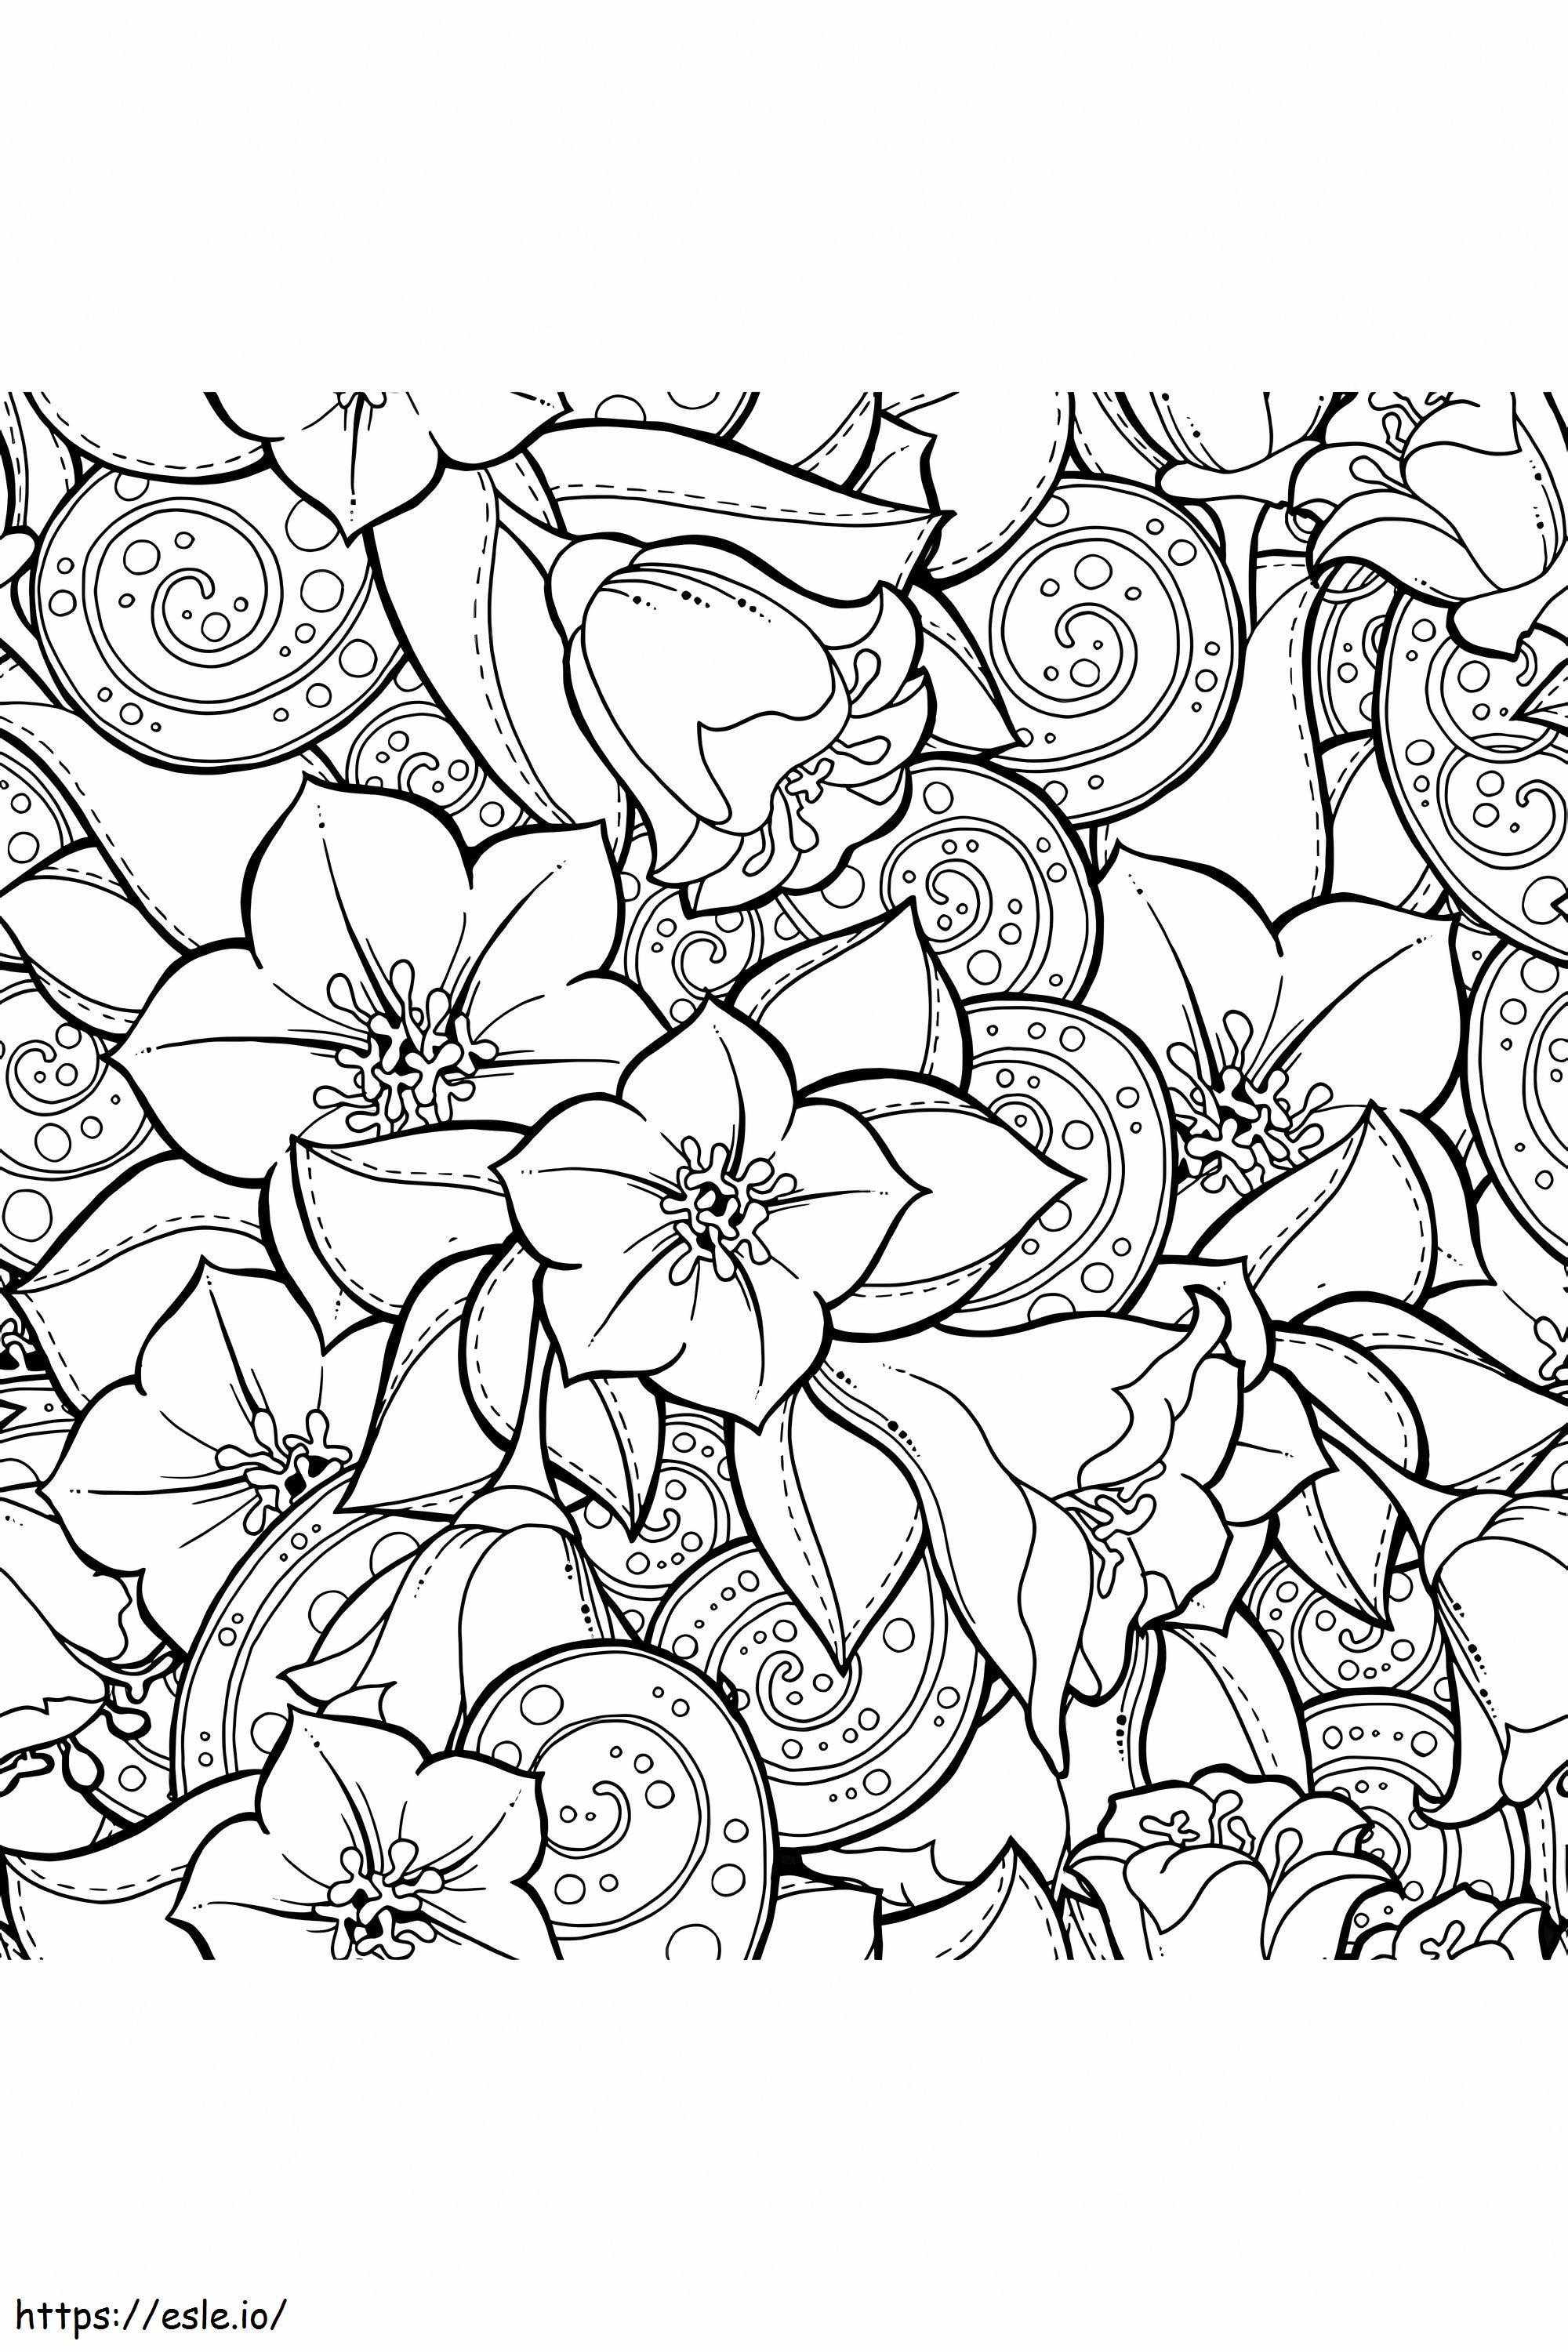 Amazing Stress Relief coloring page